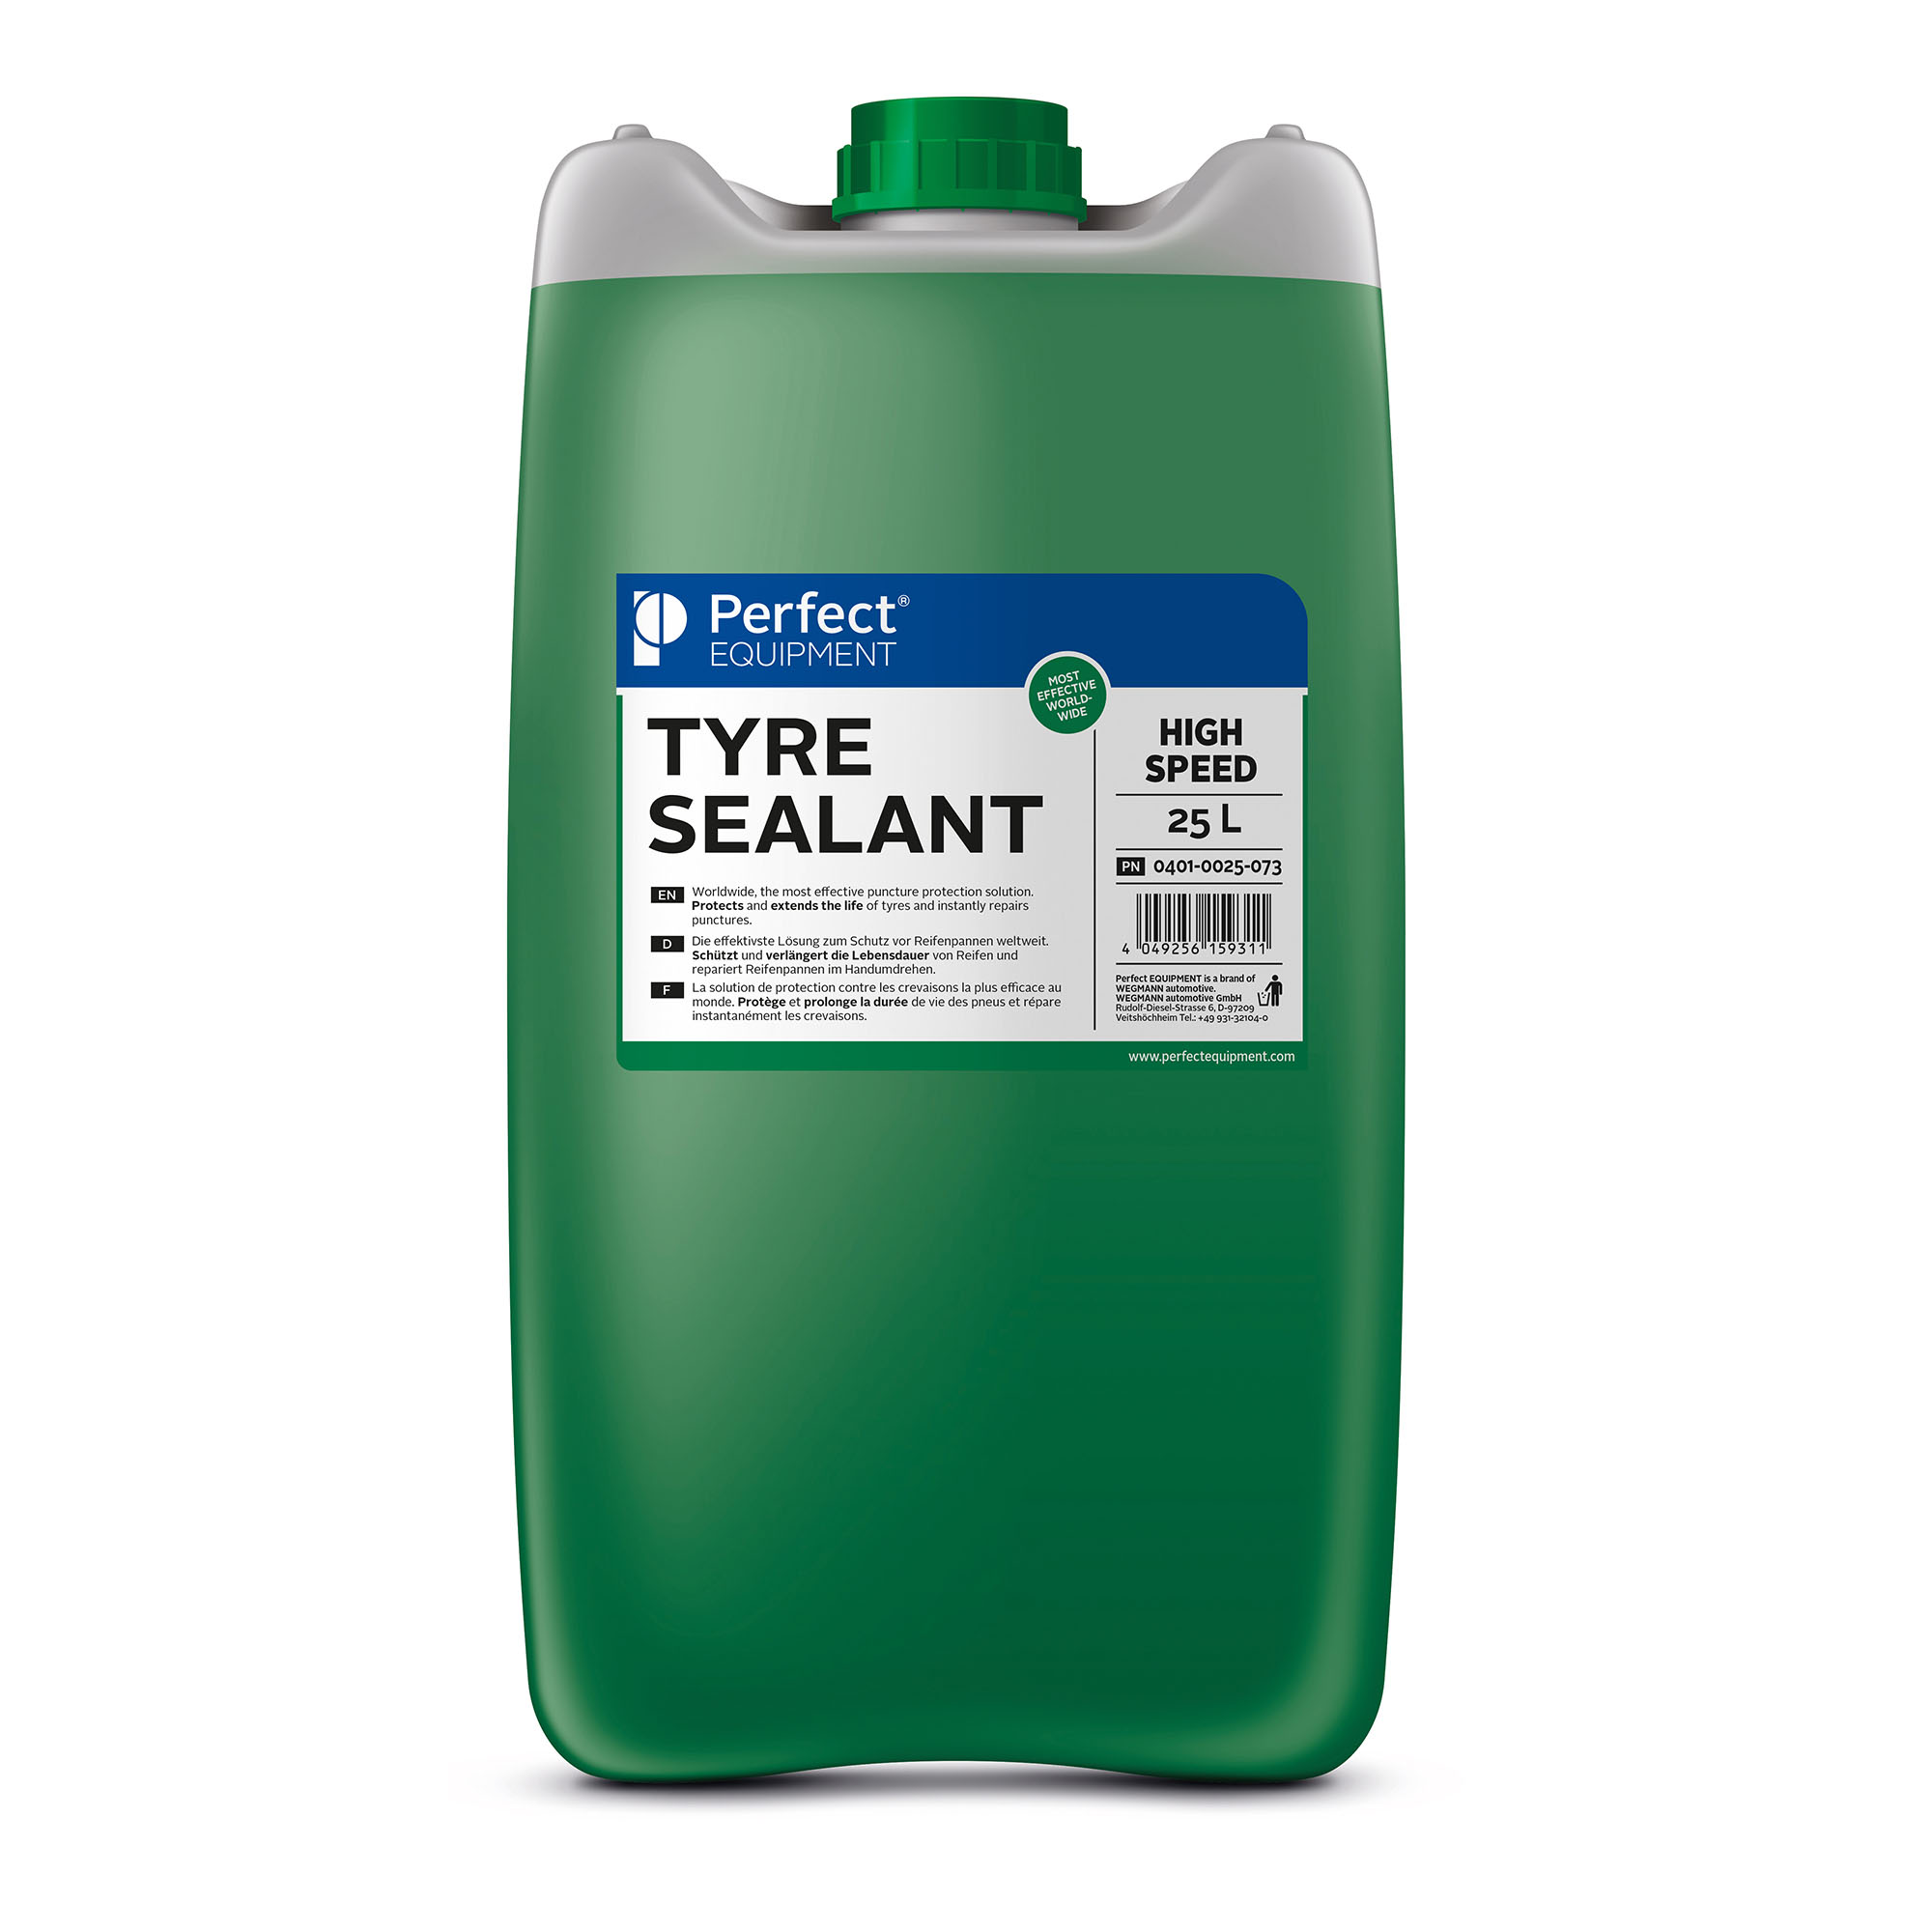 Tyre sealant - High Speed, 25l, container